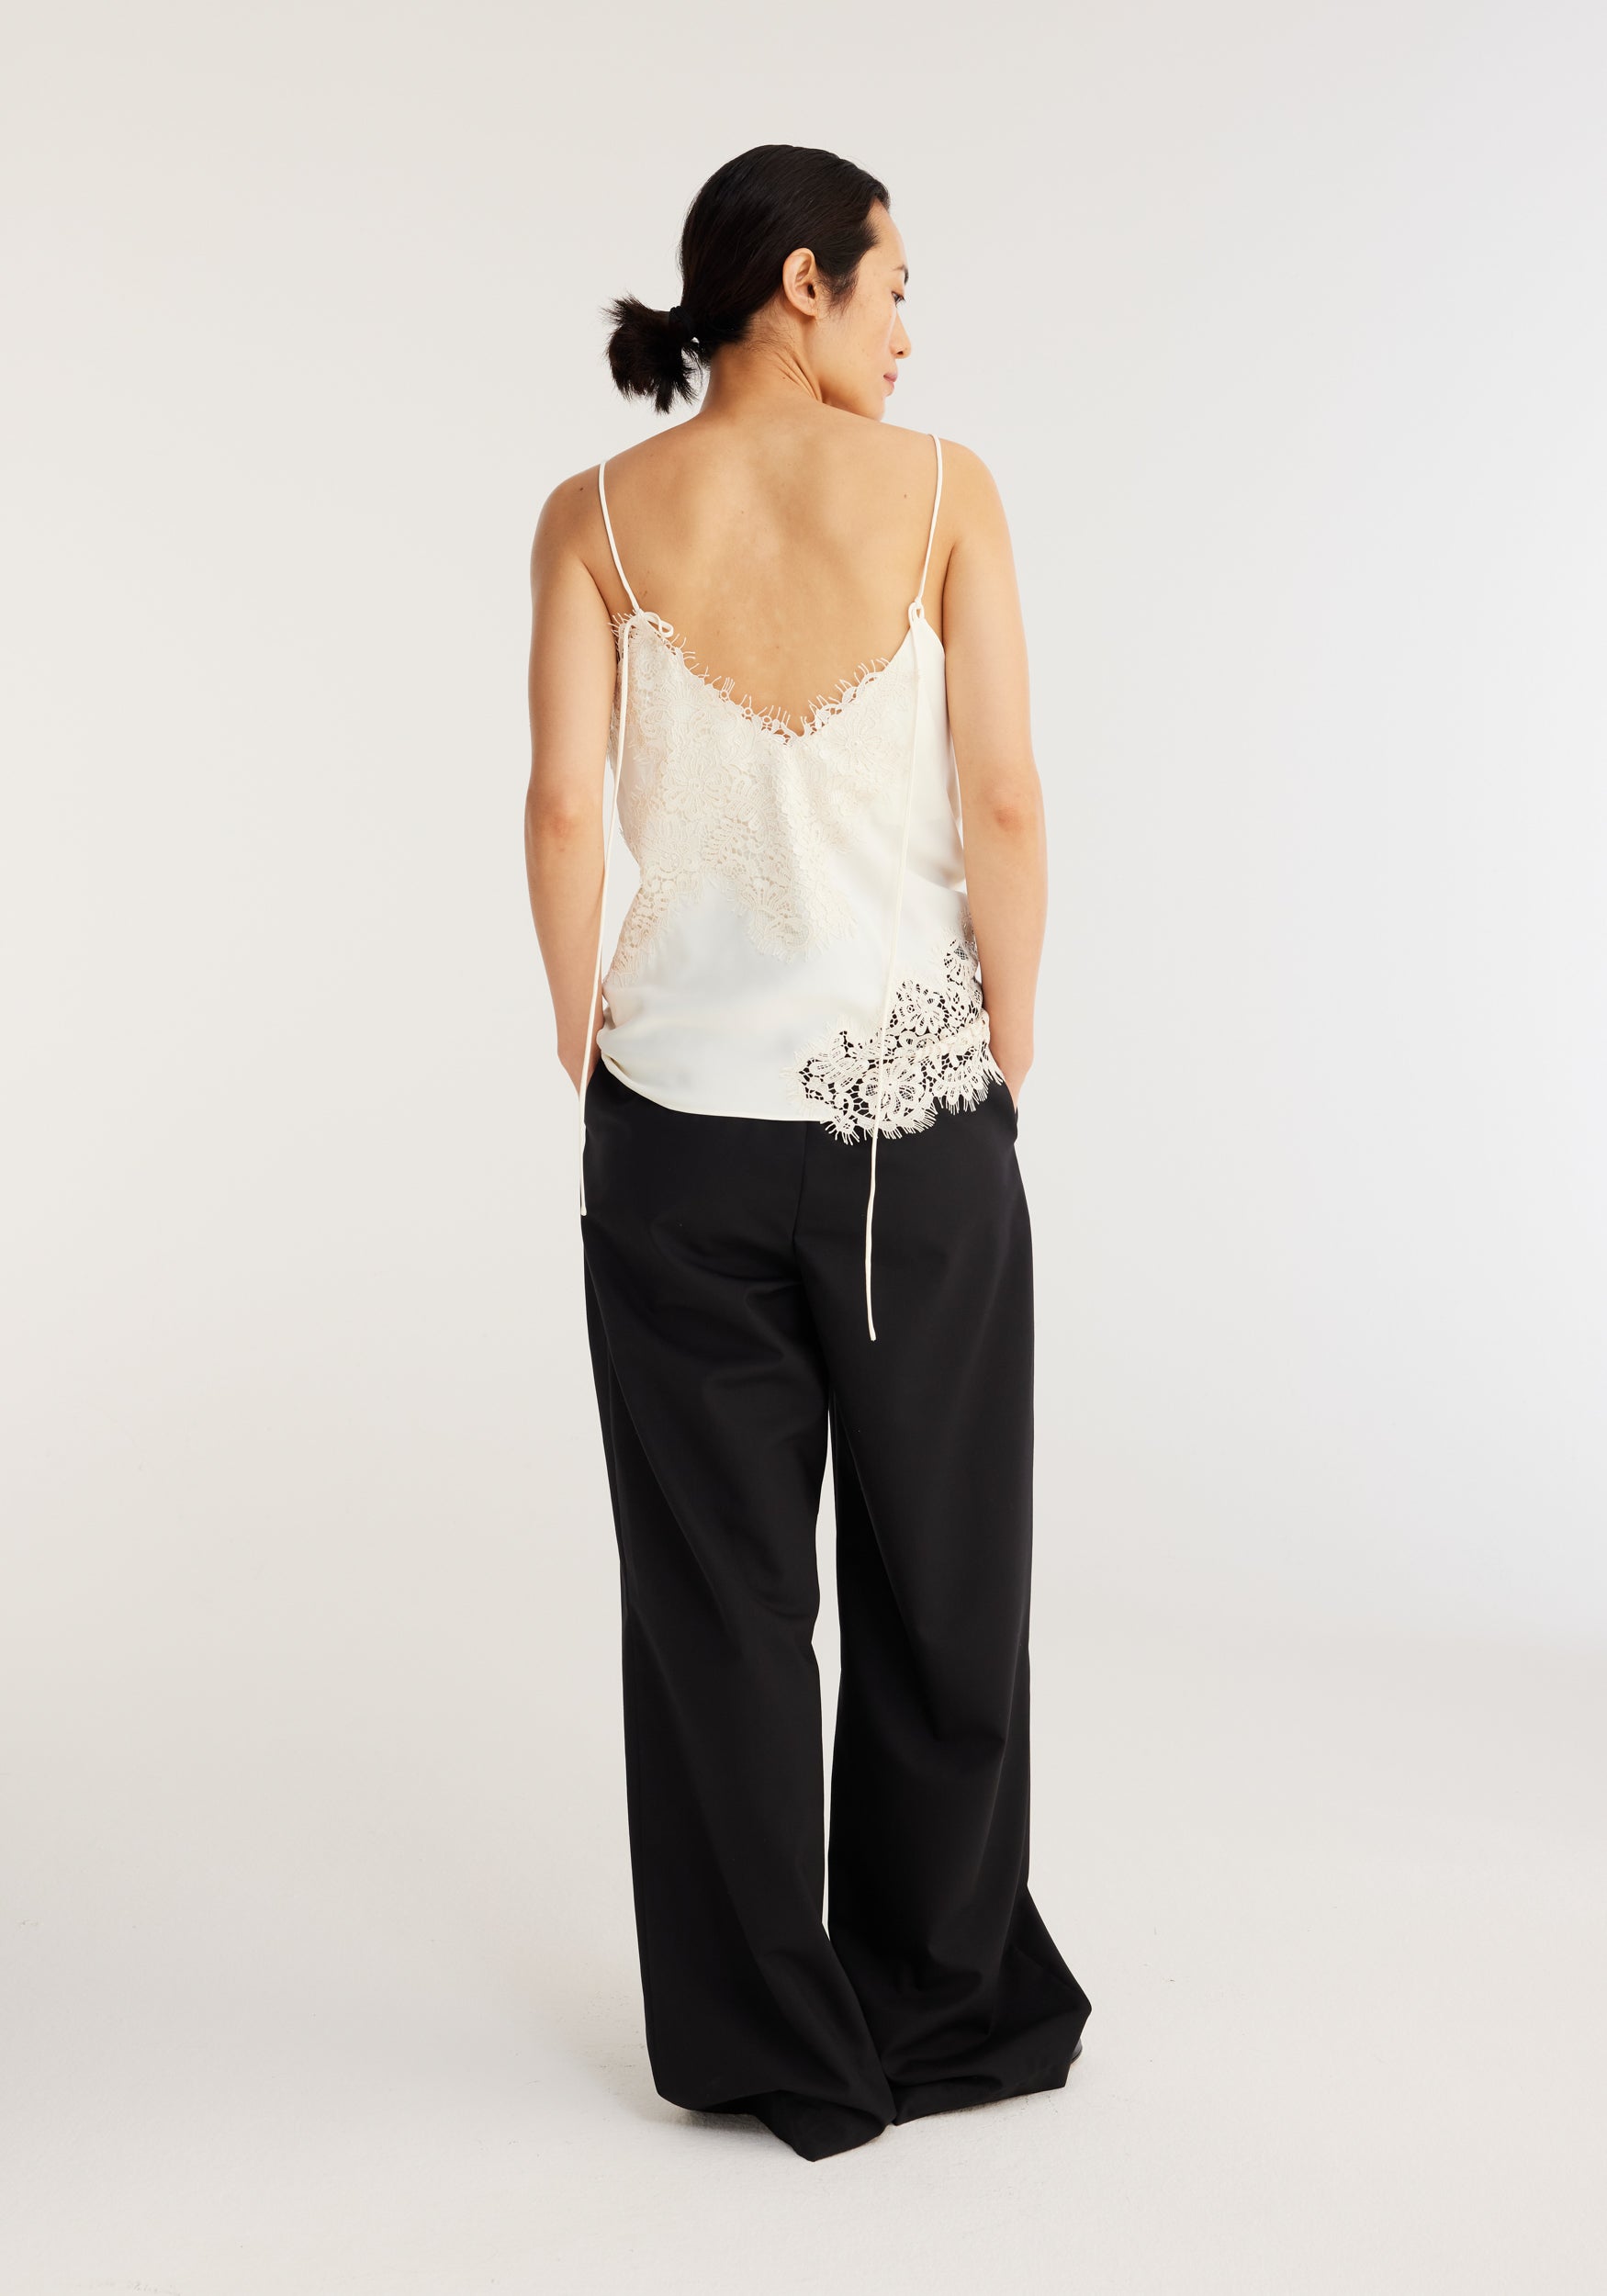 Rohe-Lace-Camisole-Top-Cream-The-New-Trend-1